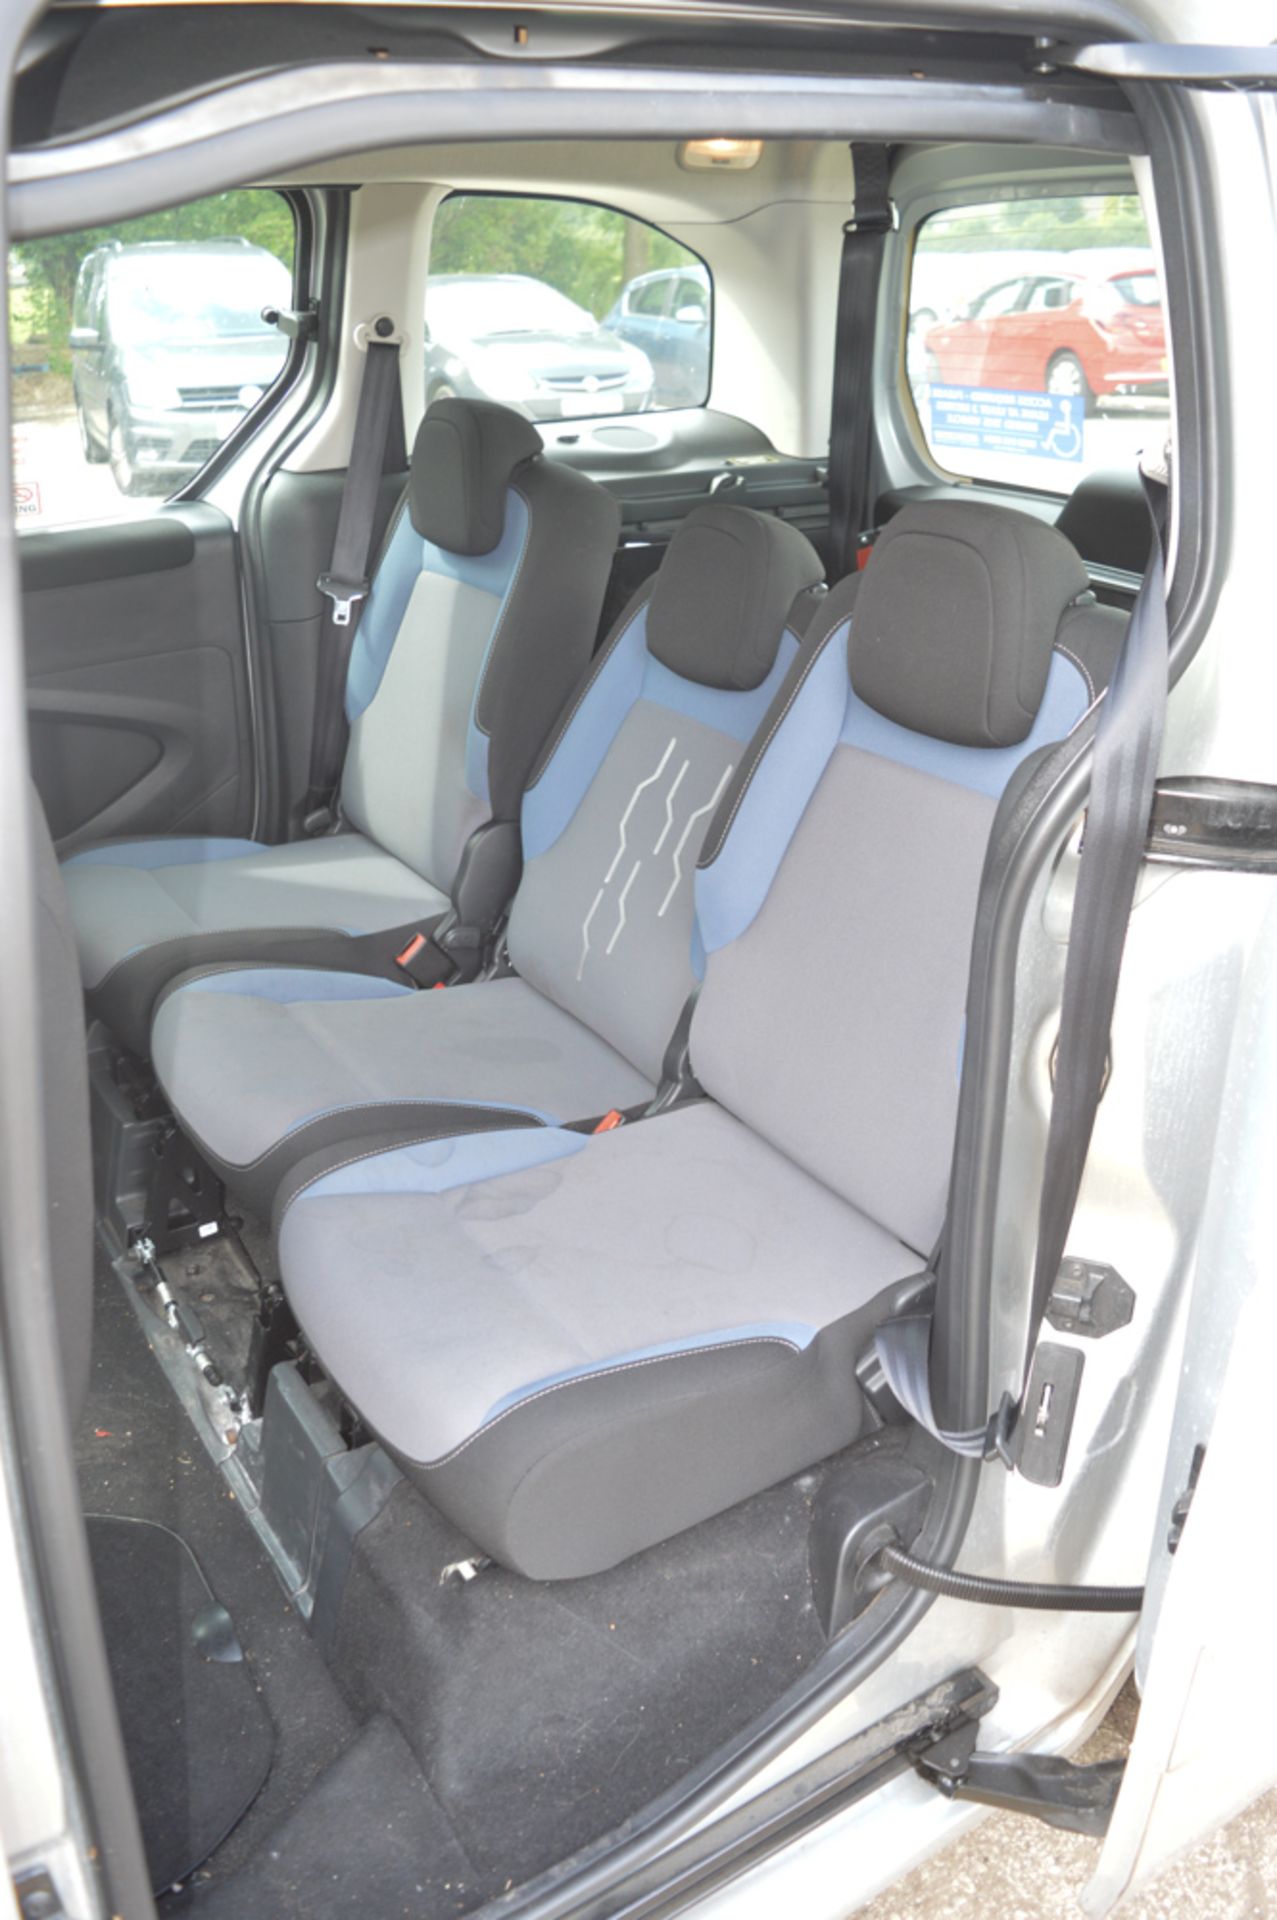 Peugeot Premier RS Blue HDI S/S 5 seat wheelchair access MPV Registration number: SF16 AHL Date of - Image 8 of 12